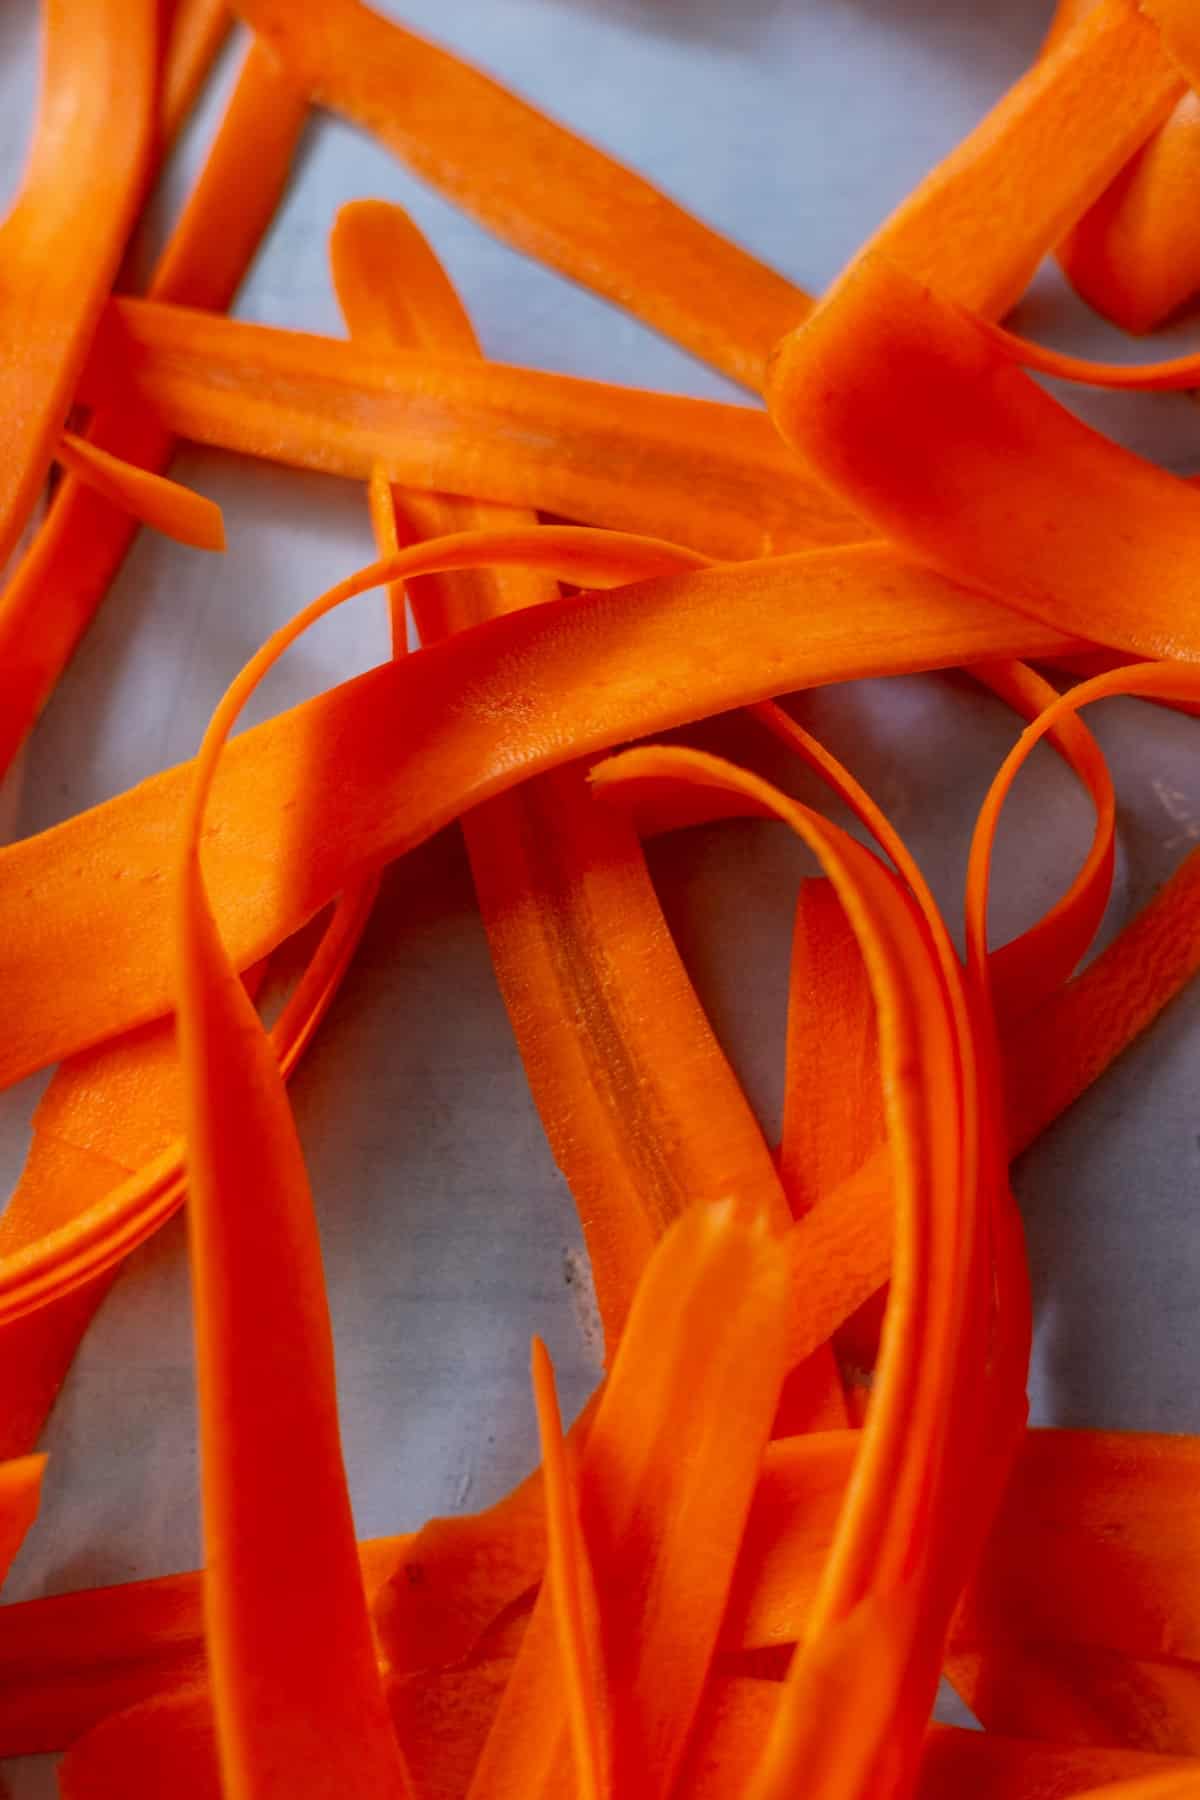 Slices of carrots or carrot ribbons in a pile